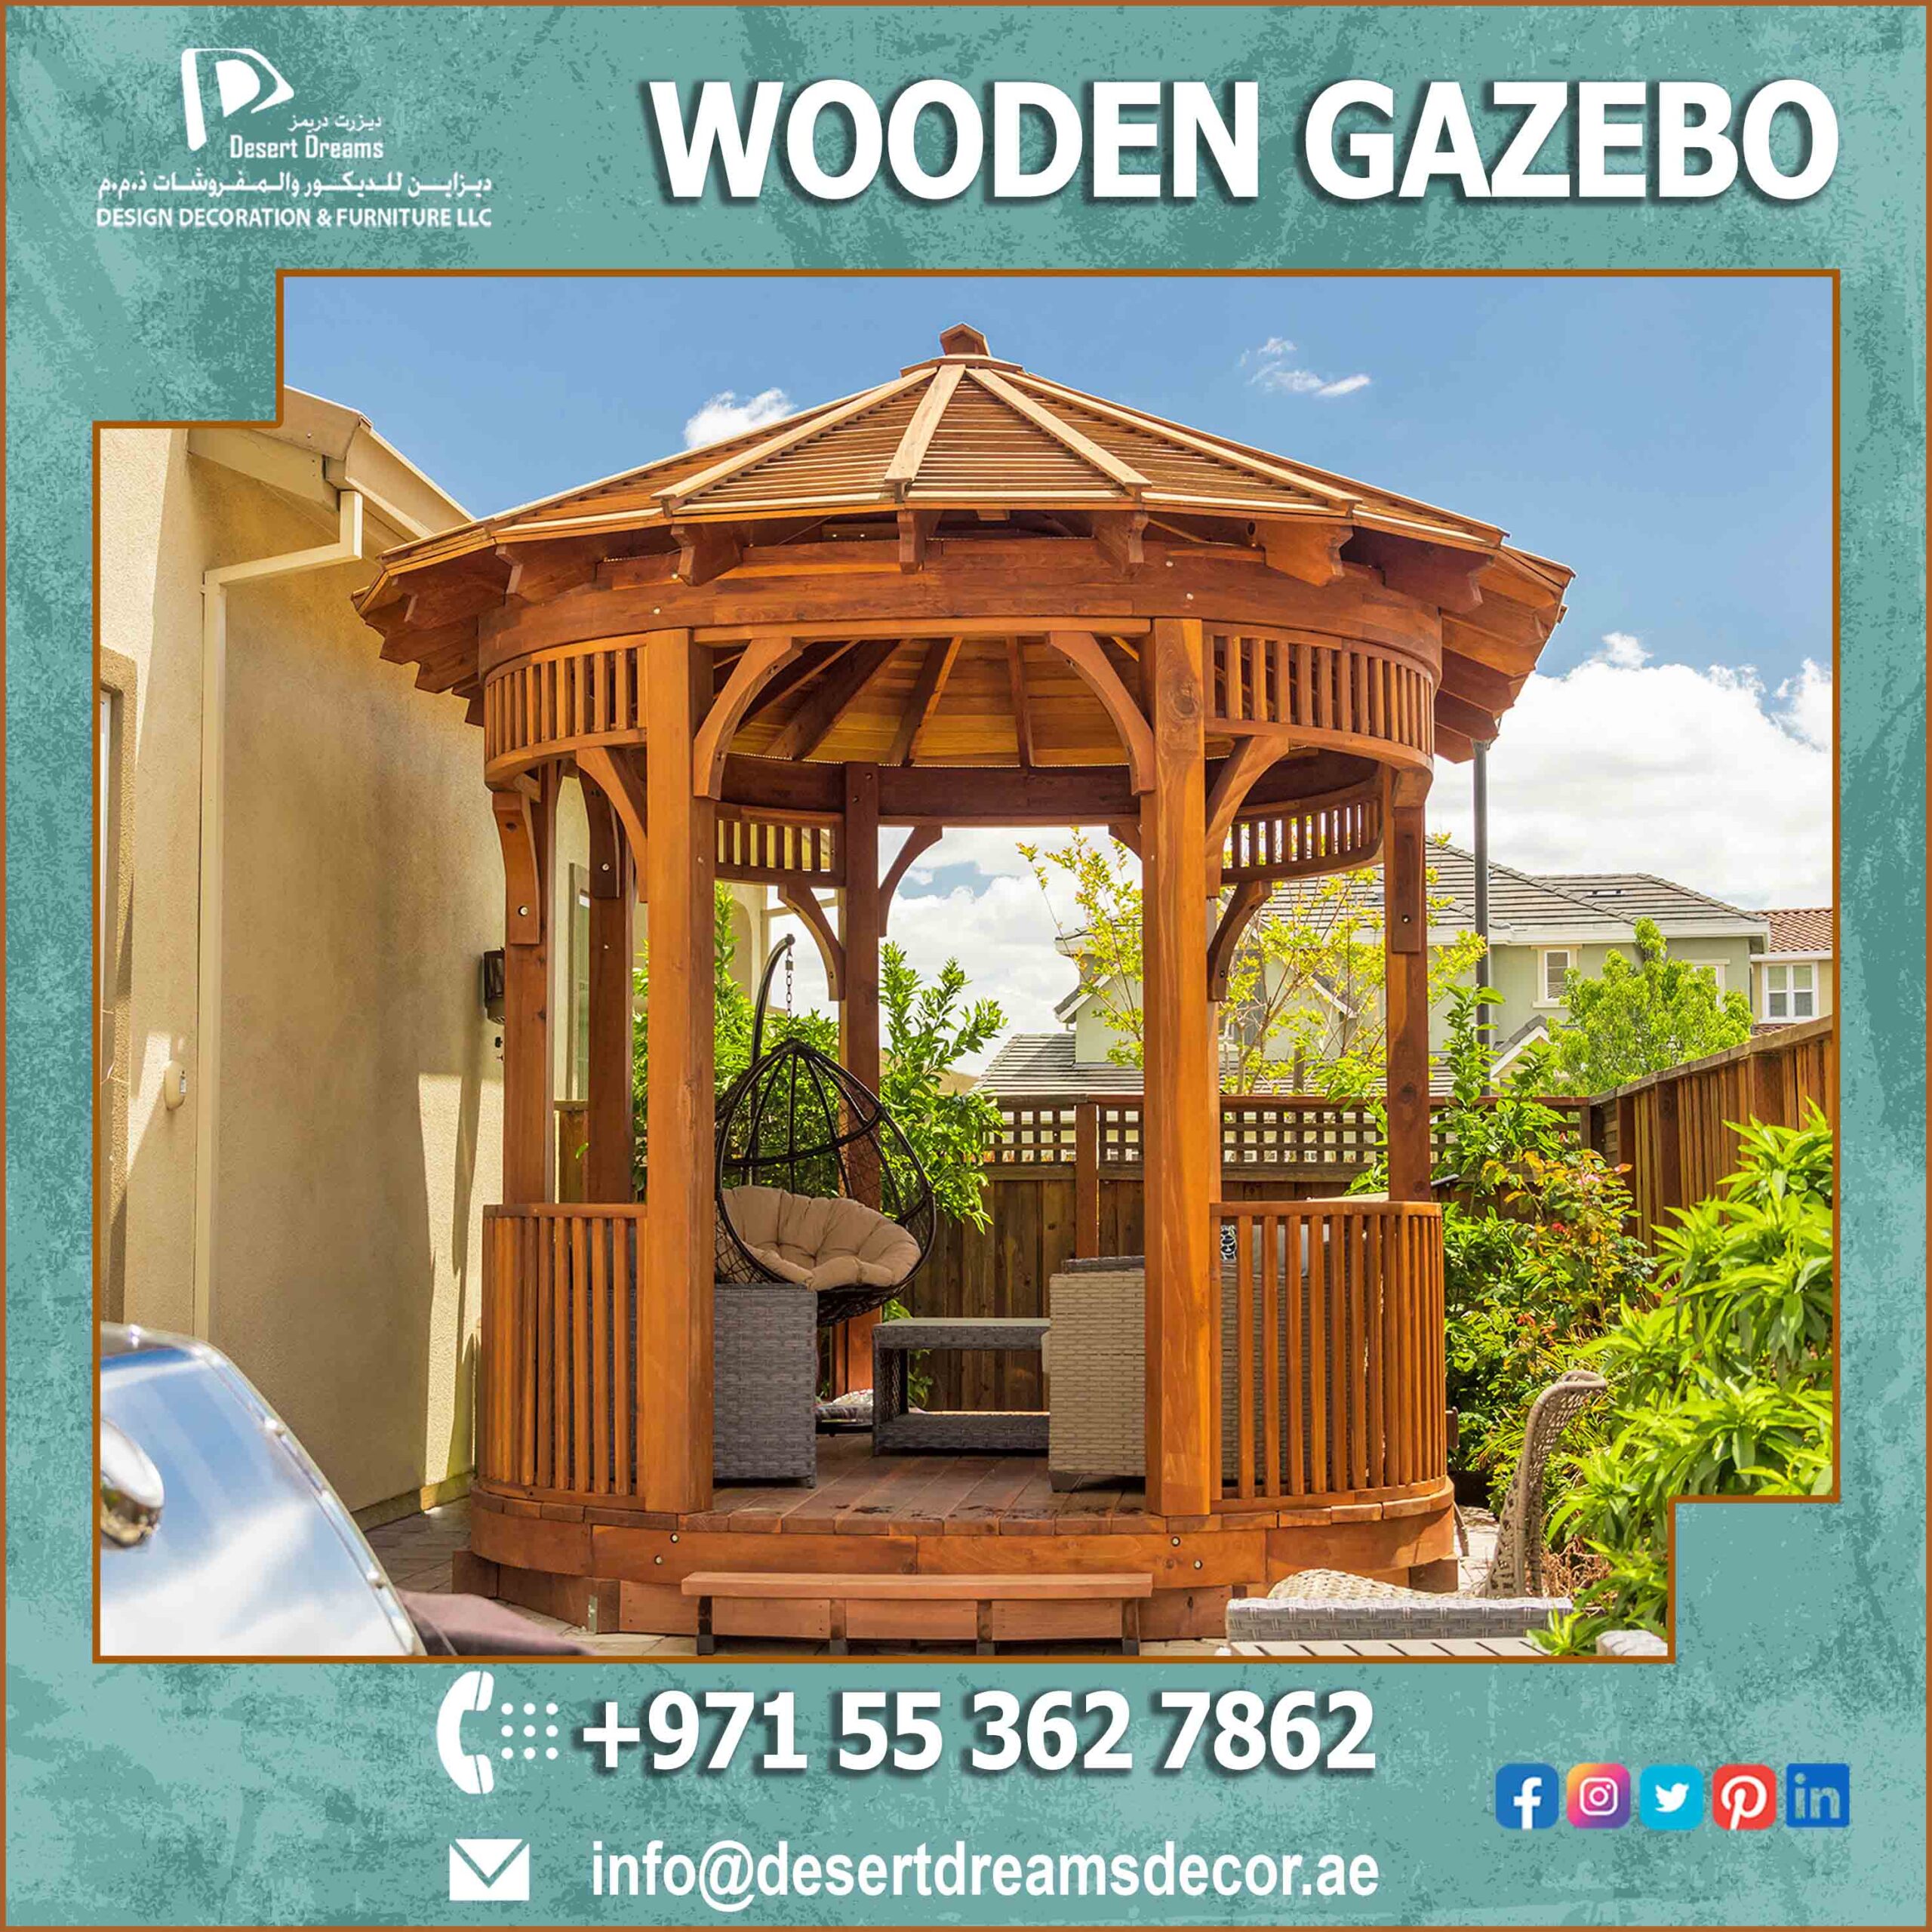 Outdoor Living Wood Gazebo with Wooden Roof in Uae.